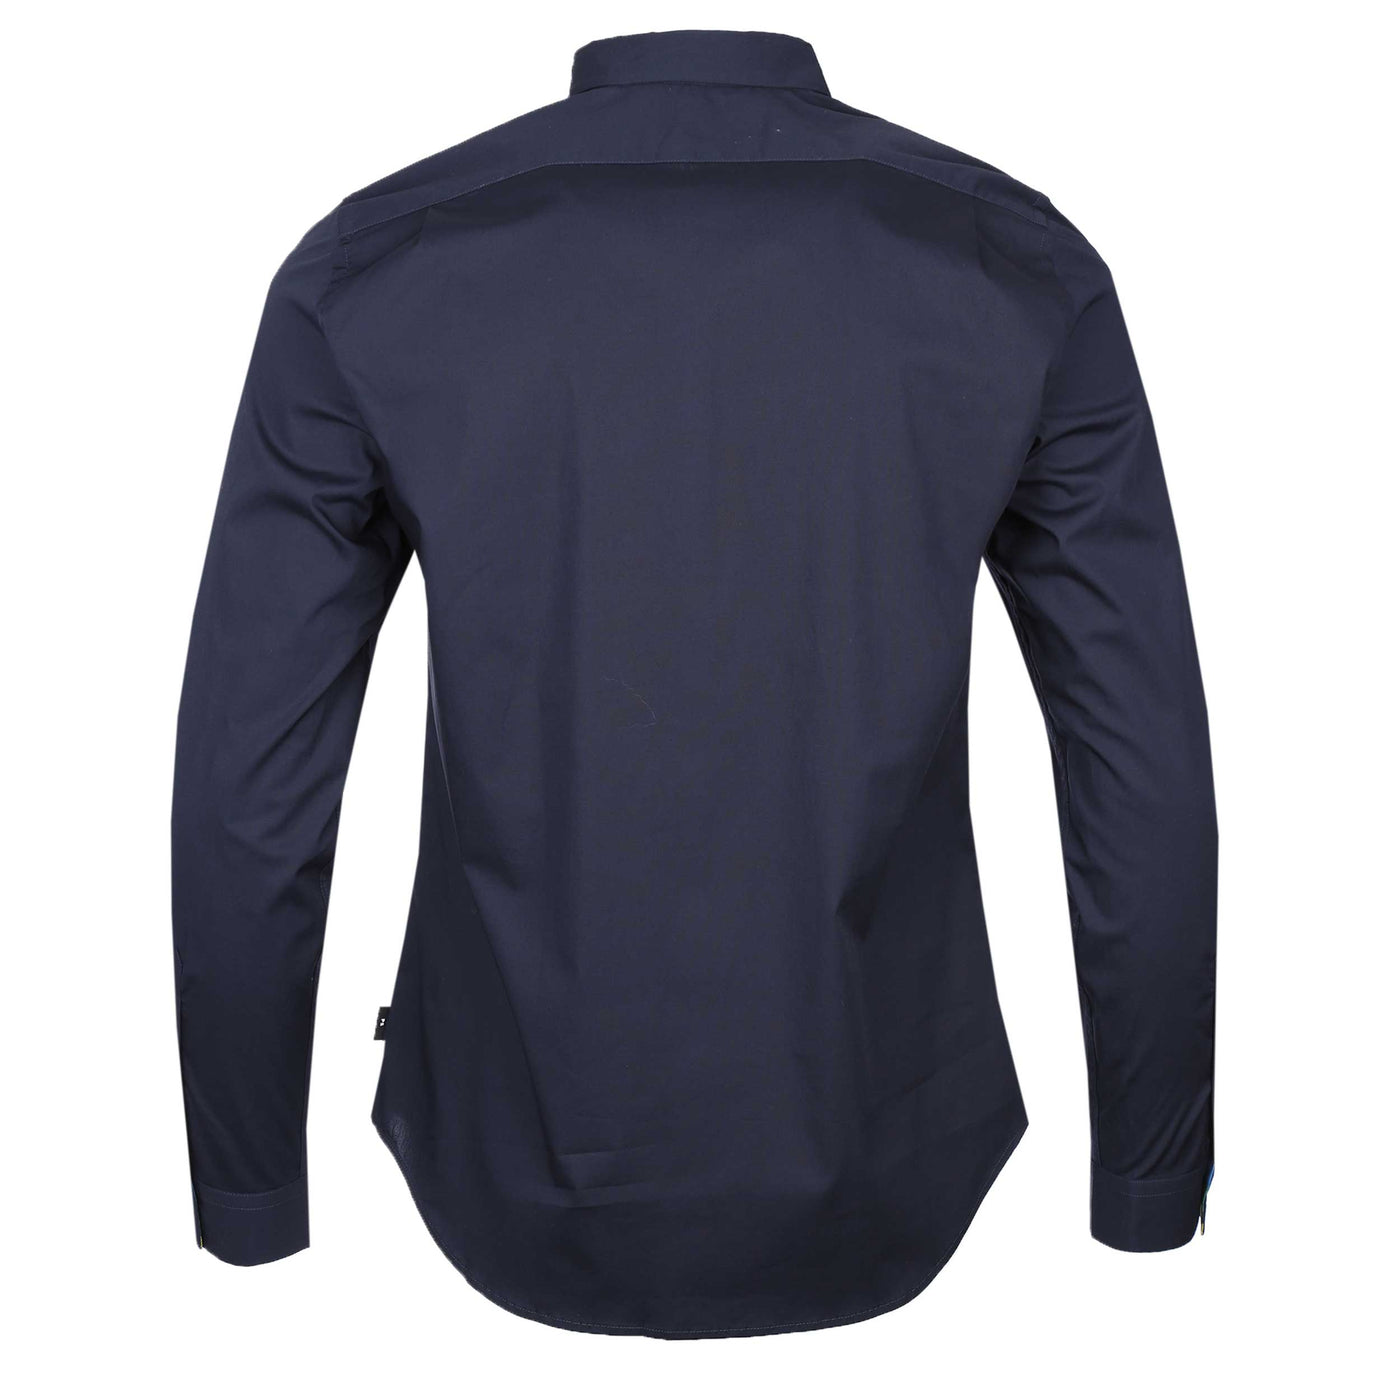 Paul Smith Tailored Fit Shirt in Navy Back